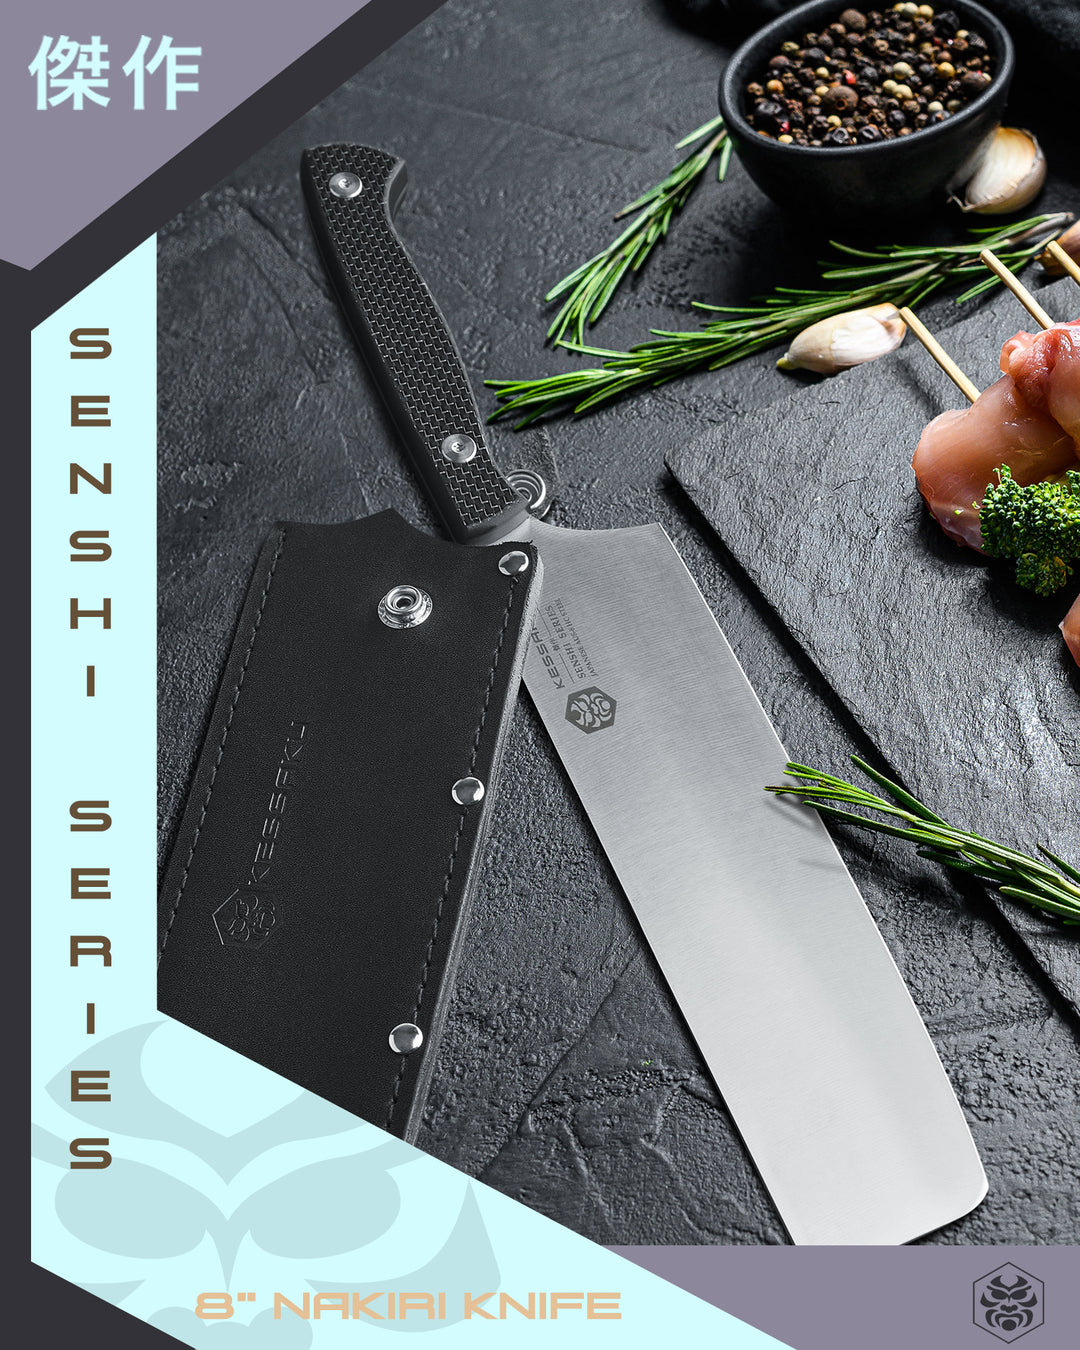 The Senshi Nakiri Knife and its Leather Sheath next to skewers of chicken and broccoli.